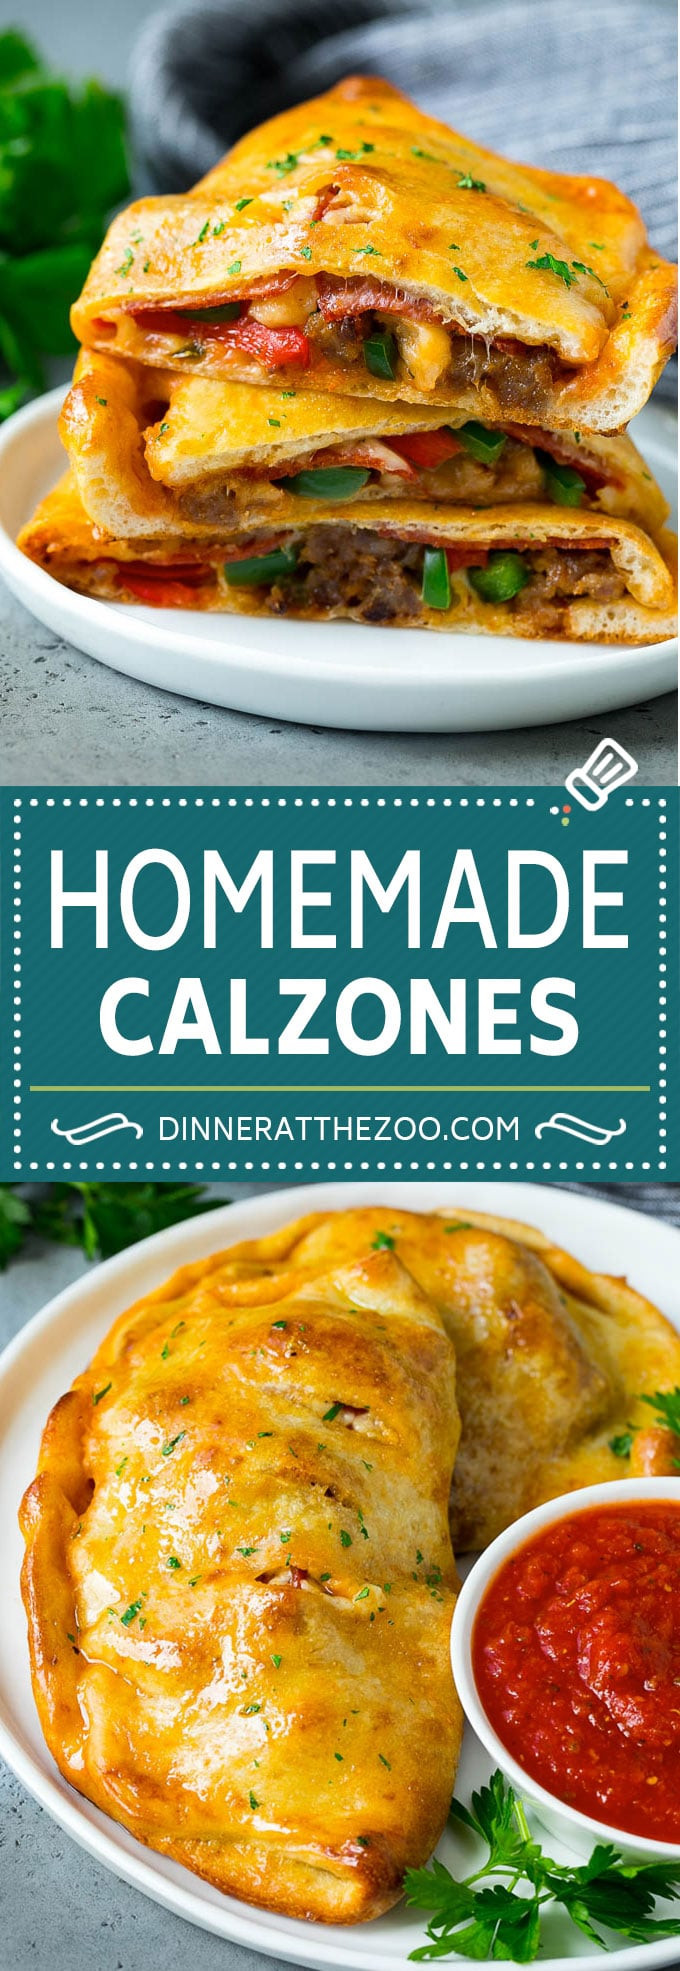 Calzone Recipe With Premade Pizza Dough
 Calzone Recipe Dinner at the Zoo